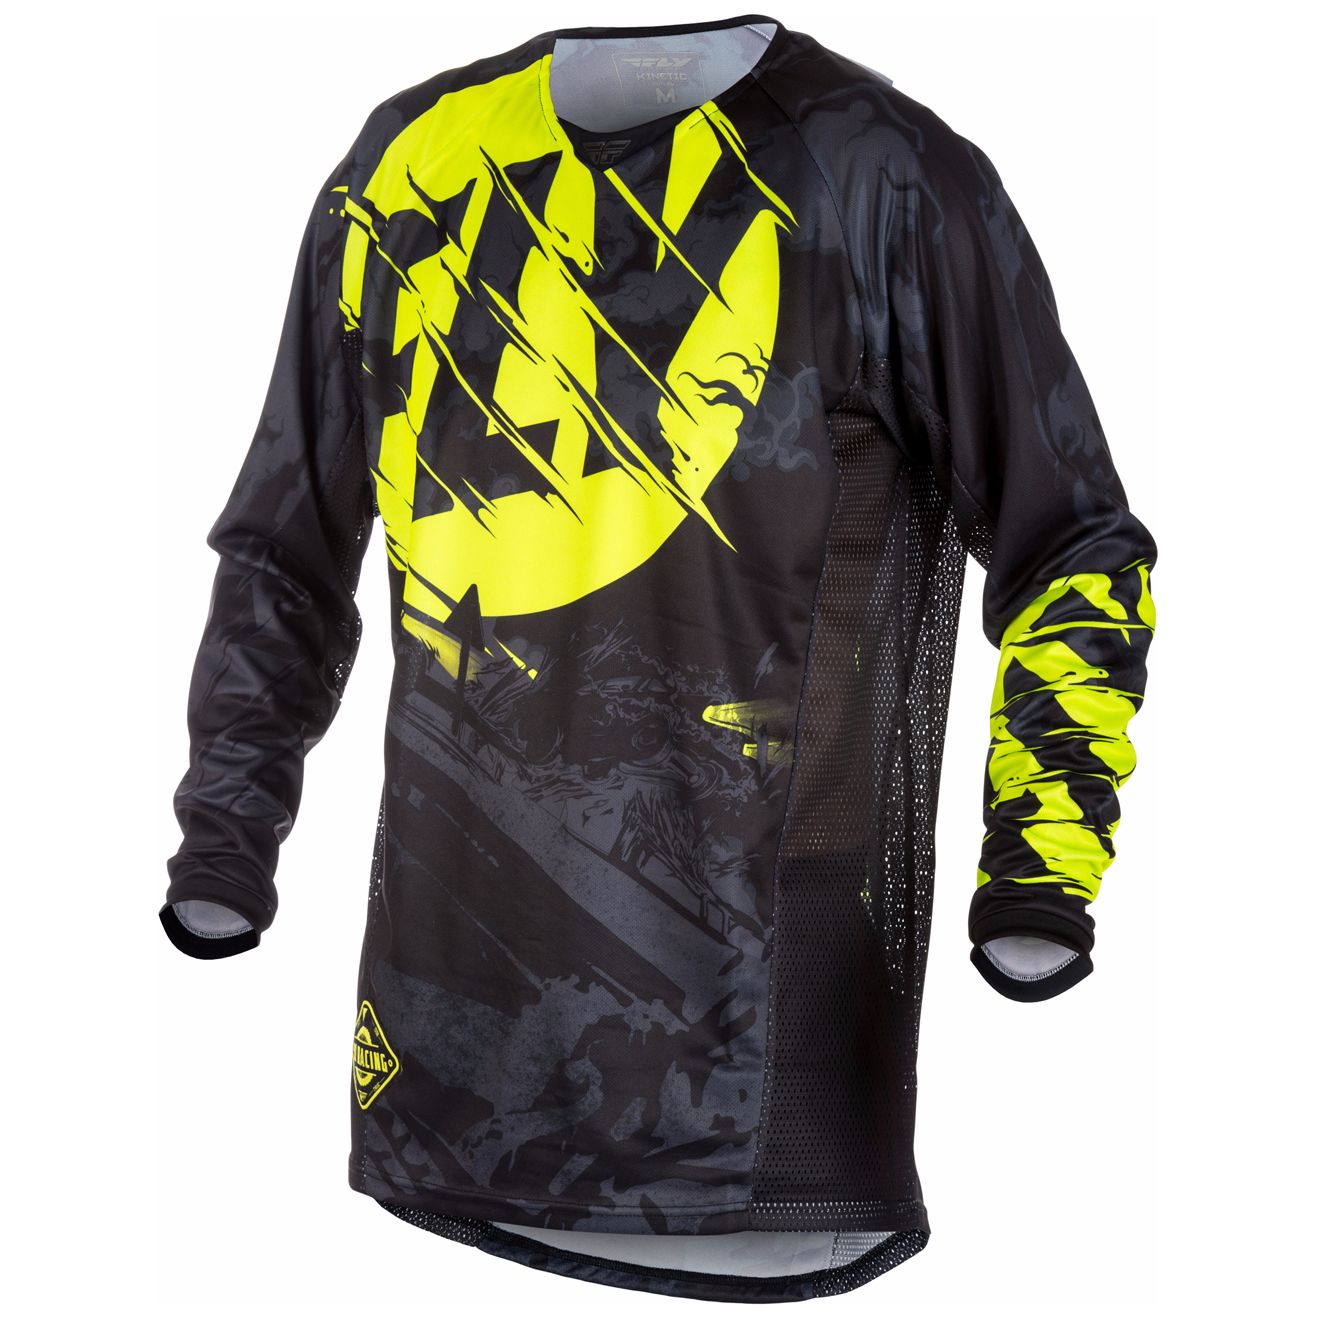 Maillot Cross Fly Kinetic Outlaw - Noir Jaune Fluo -